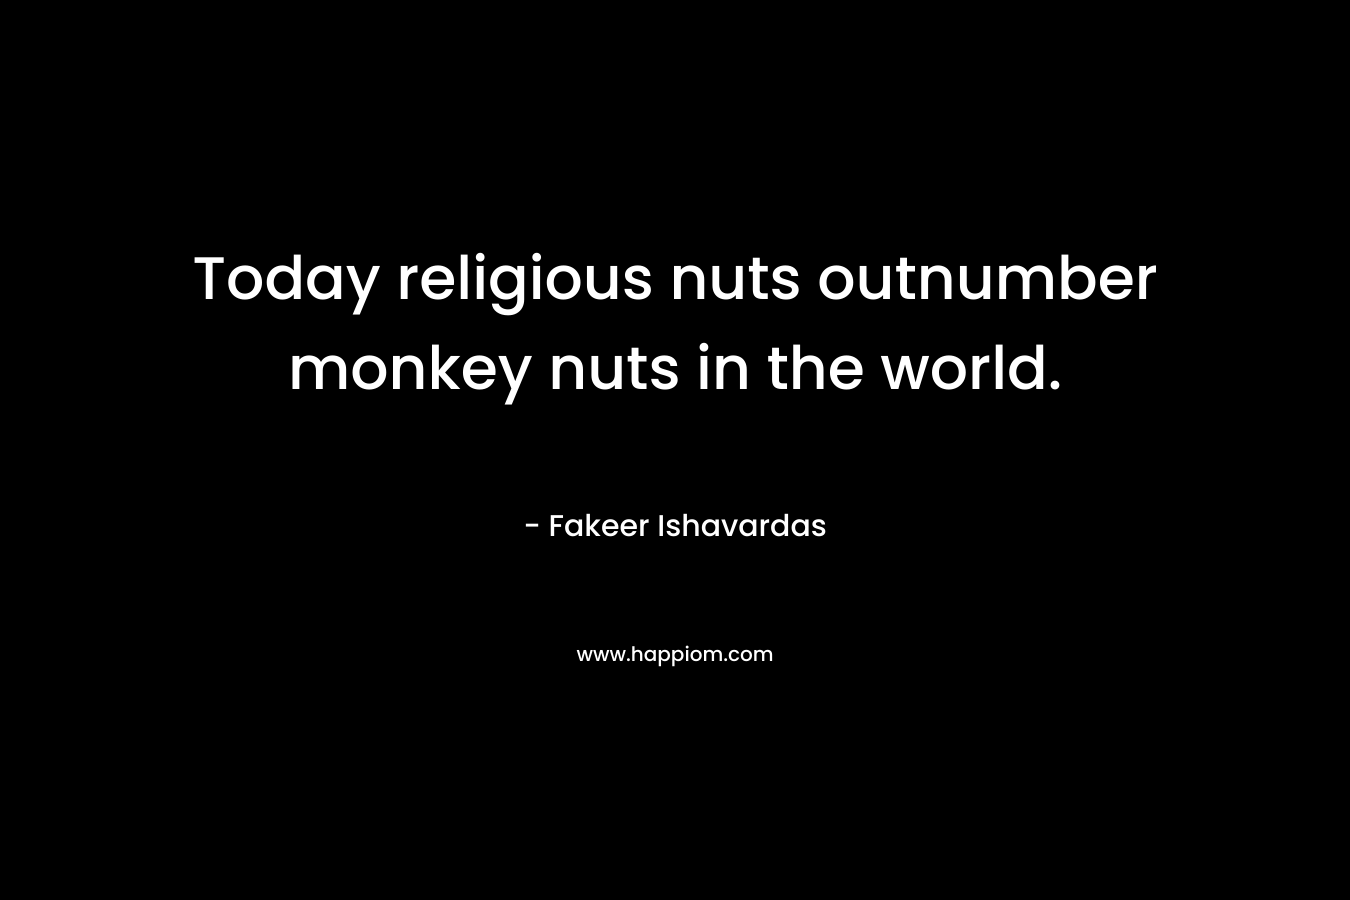 Today religious nuts outnumber monkey nuts in the world.